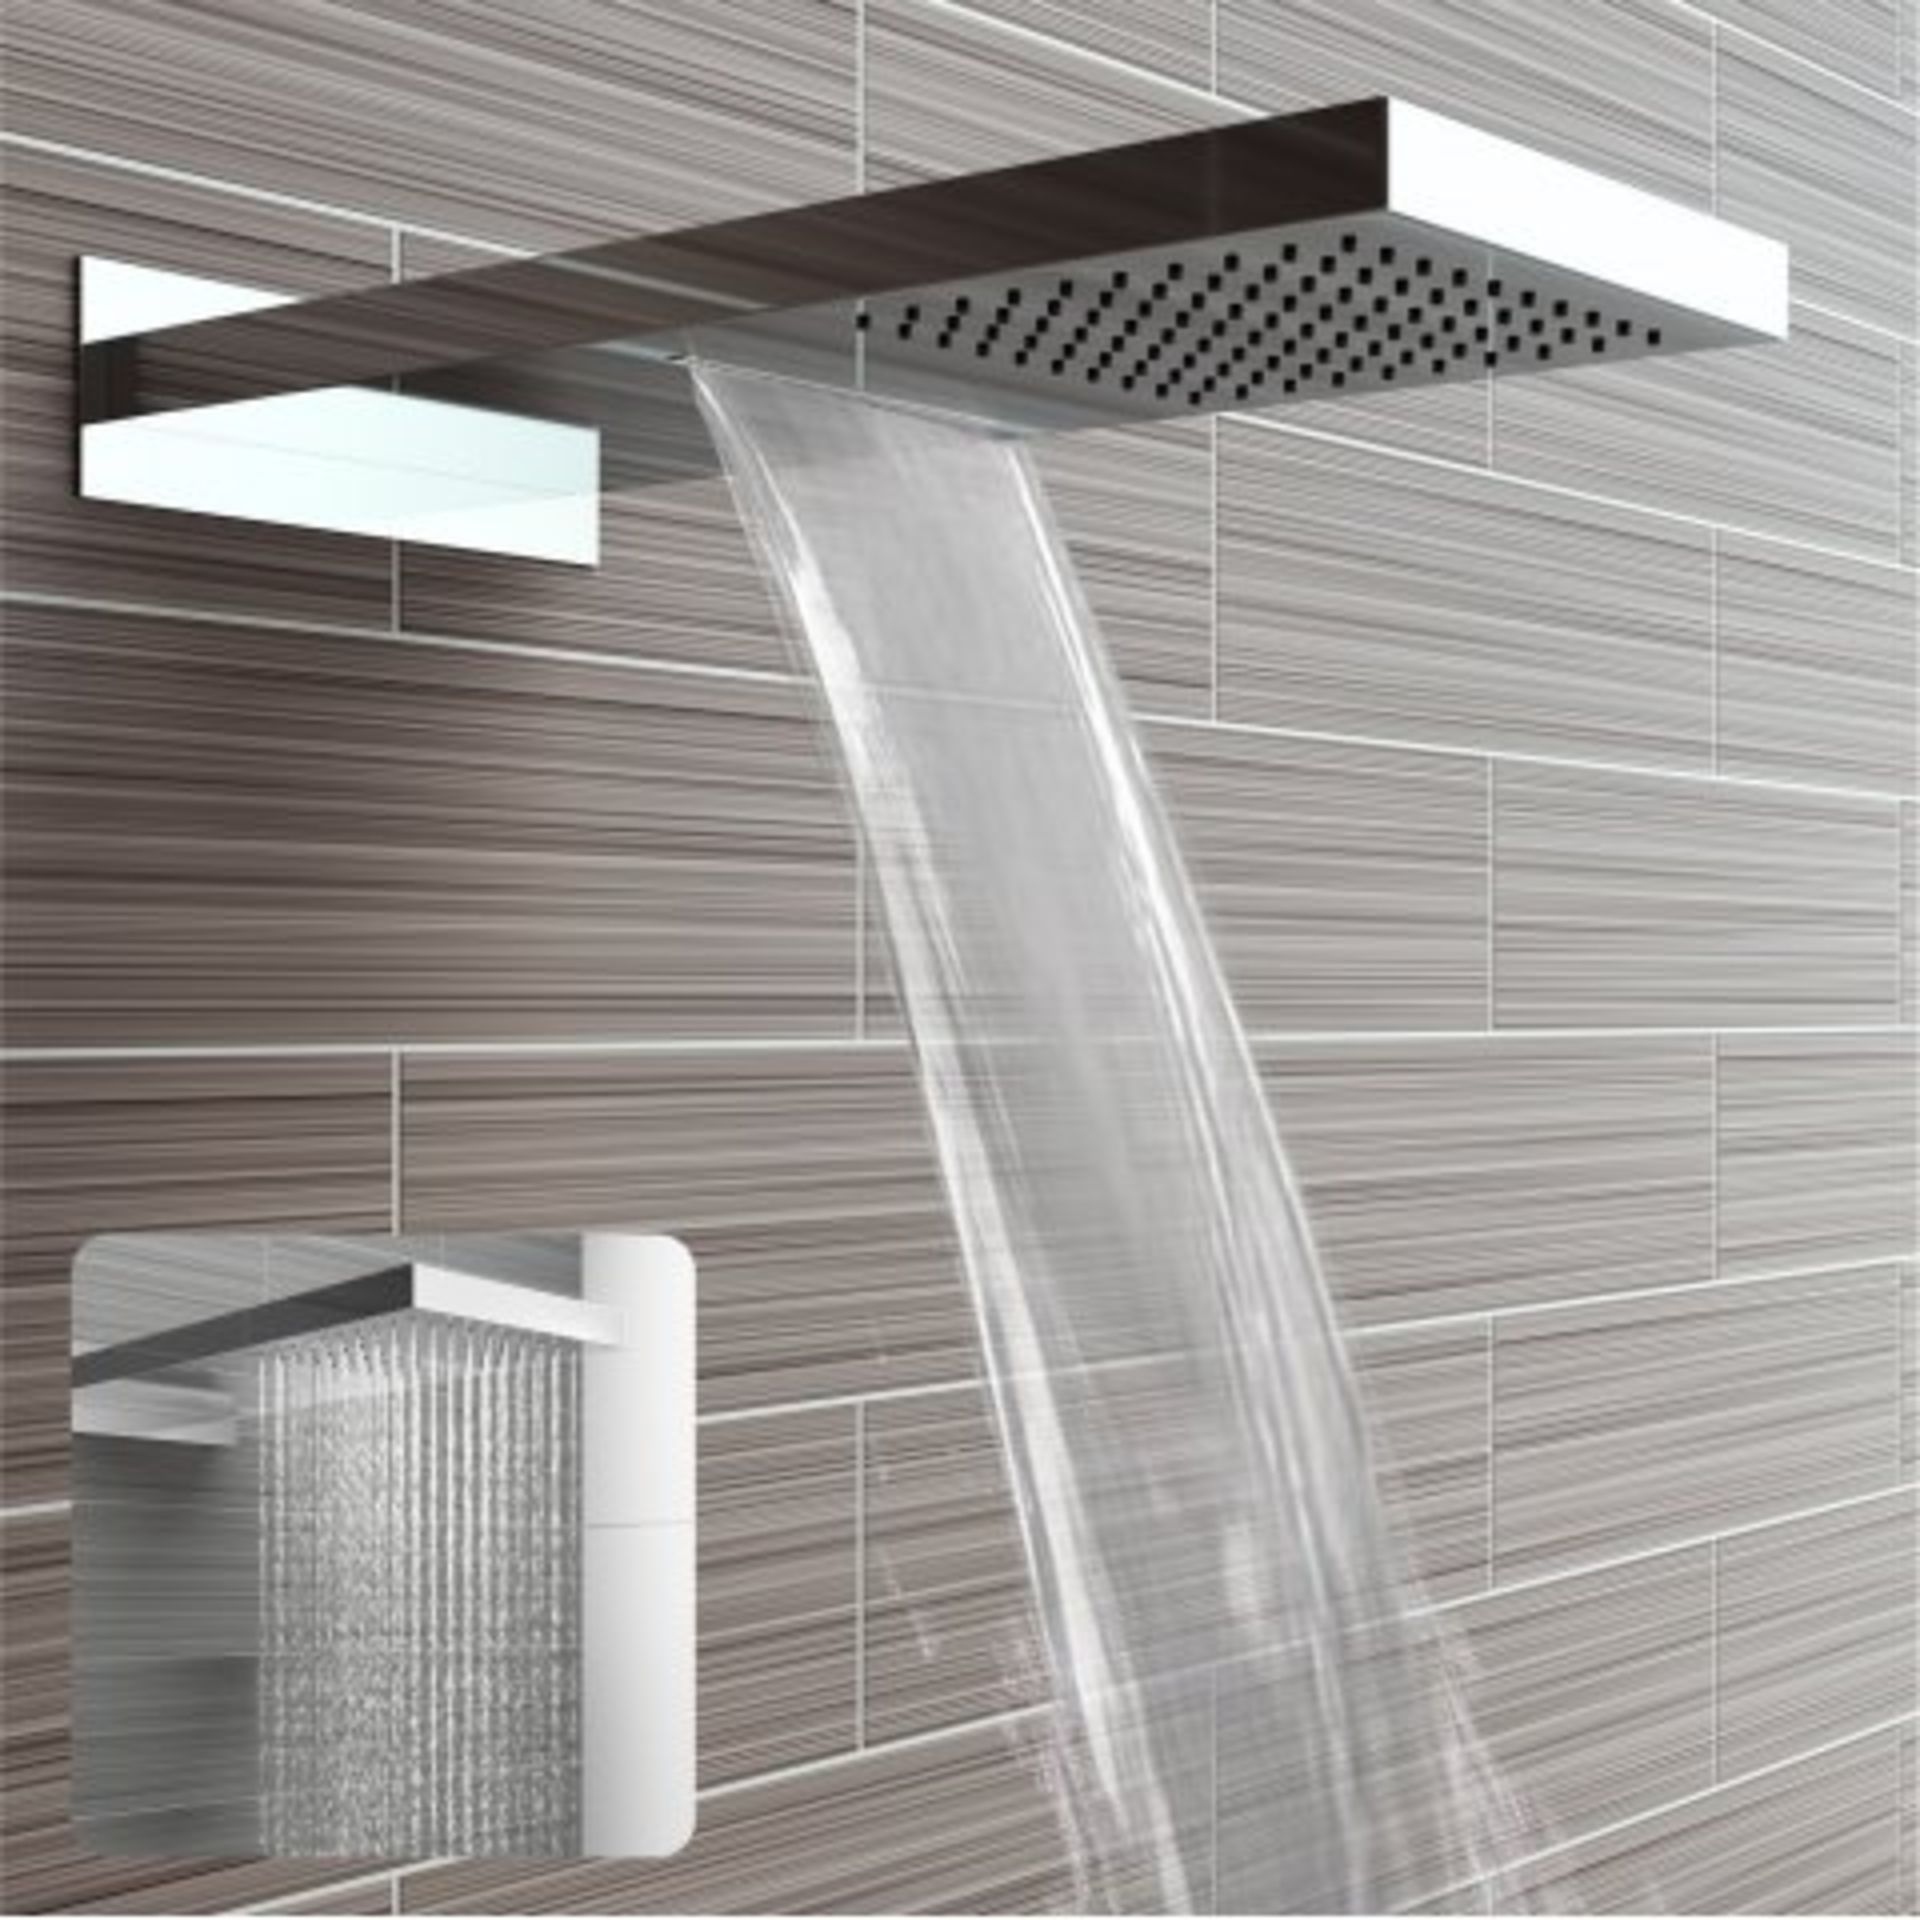 (Y45) Stainless Steel 230x500mm Waterfall Shower Head. RRP £374.98. "What An Experience": Enjoy - Image 2 of 5